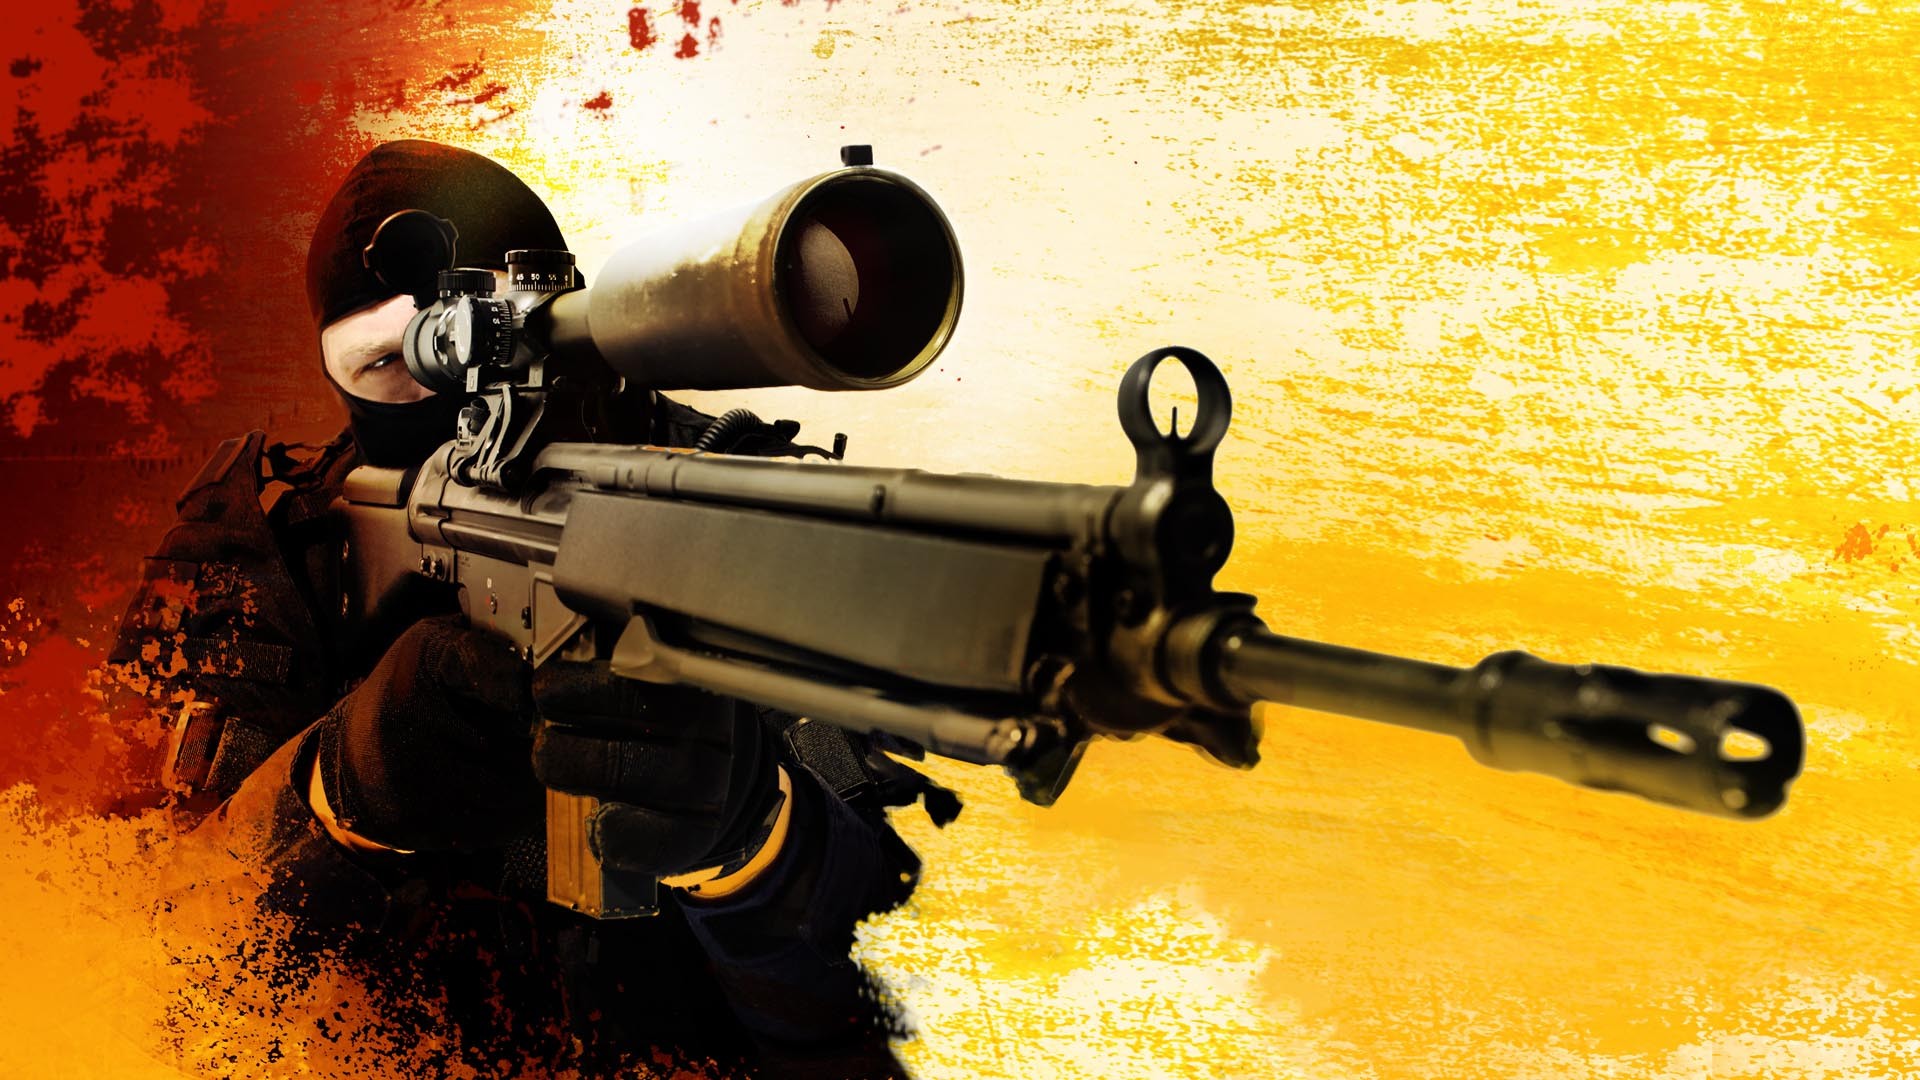 General 1920x1080 Counter-Strike: Global Offensive orange background video games sniper rifle PC gaming weapon men rifles video game art